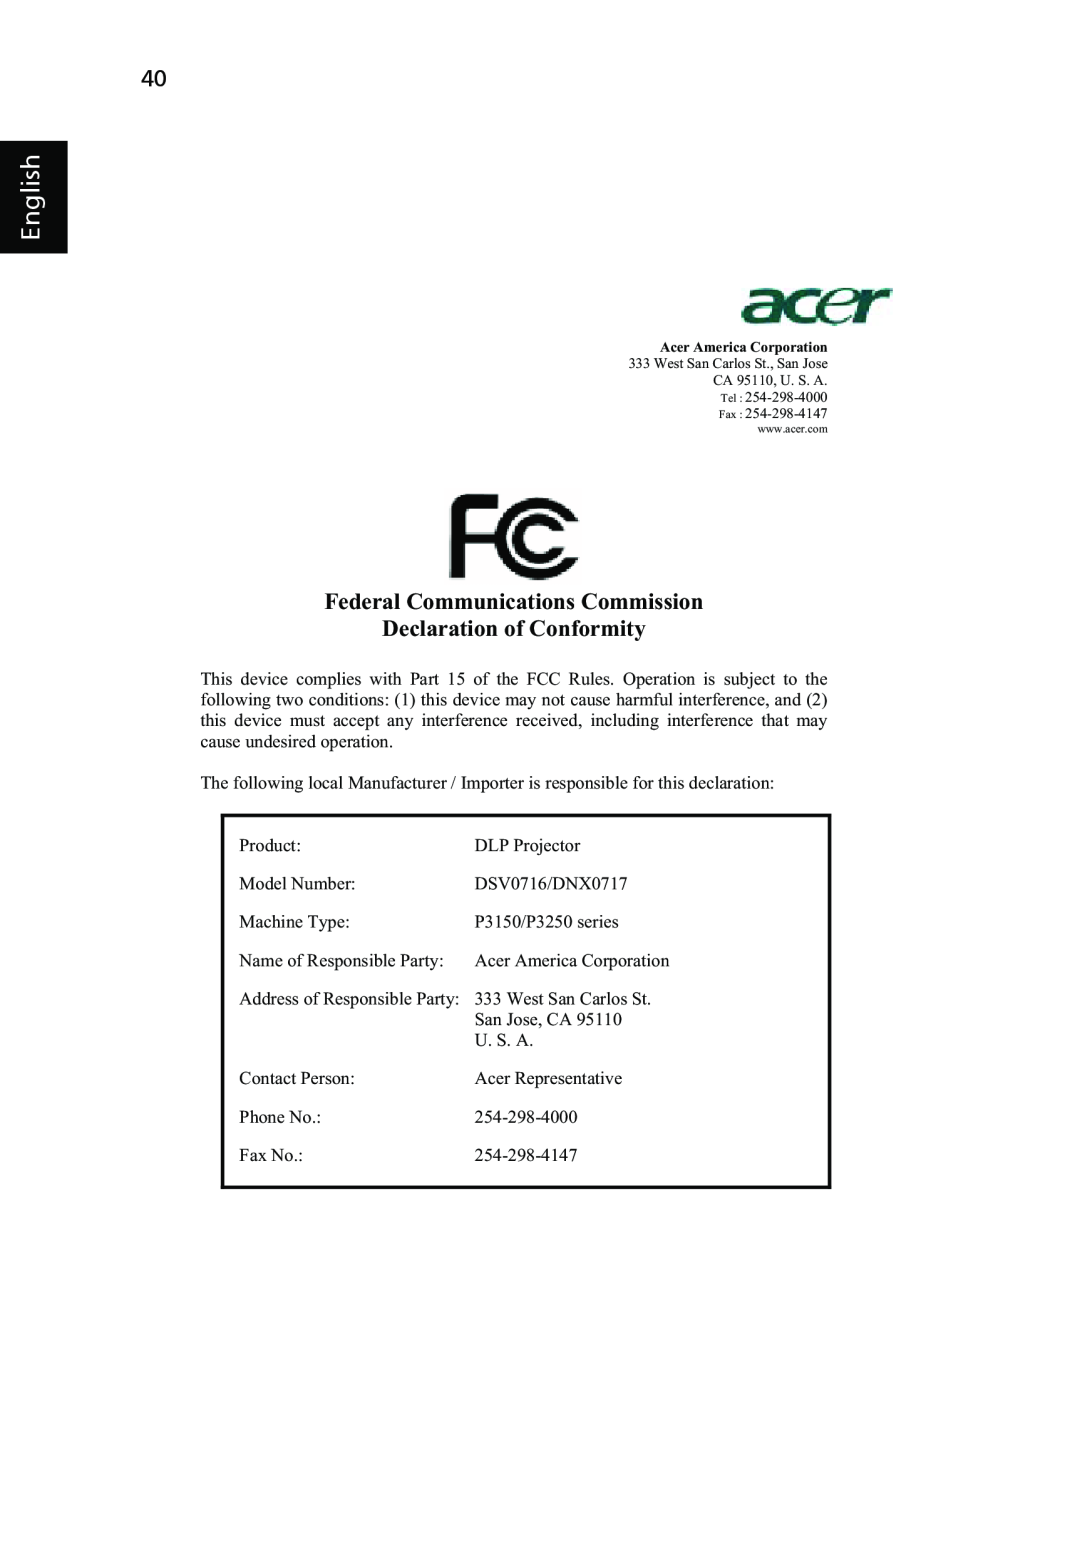 Acer P3150 Series, P3250 Series manual English, Federal Communications Commission Declaration of Conformity 